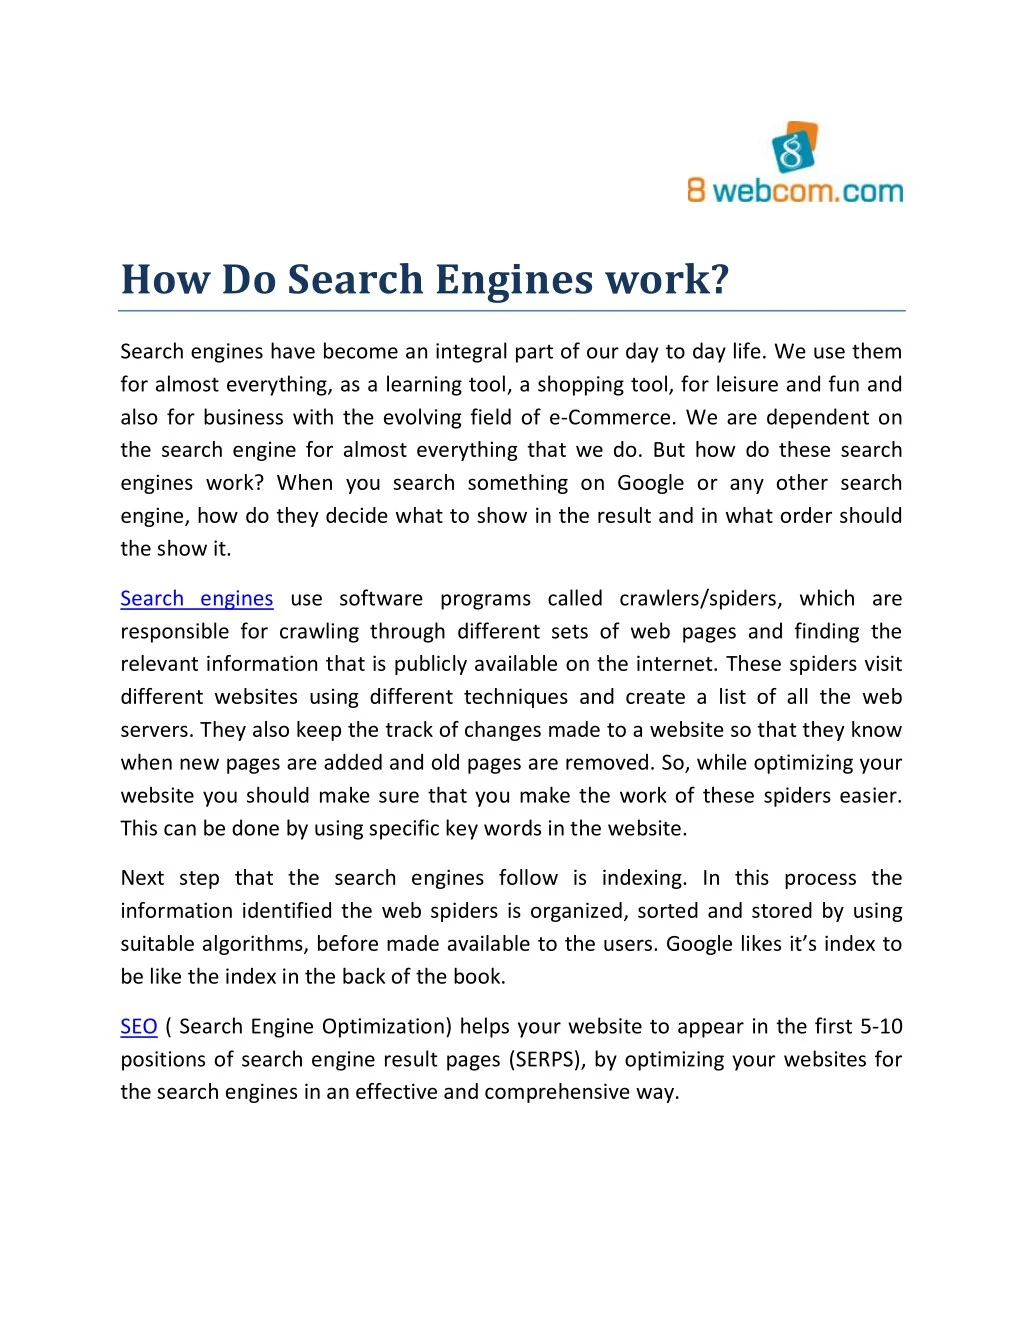 how do search engines work